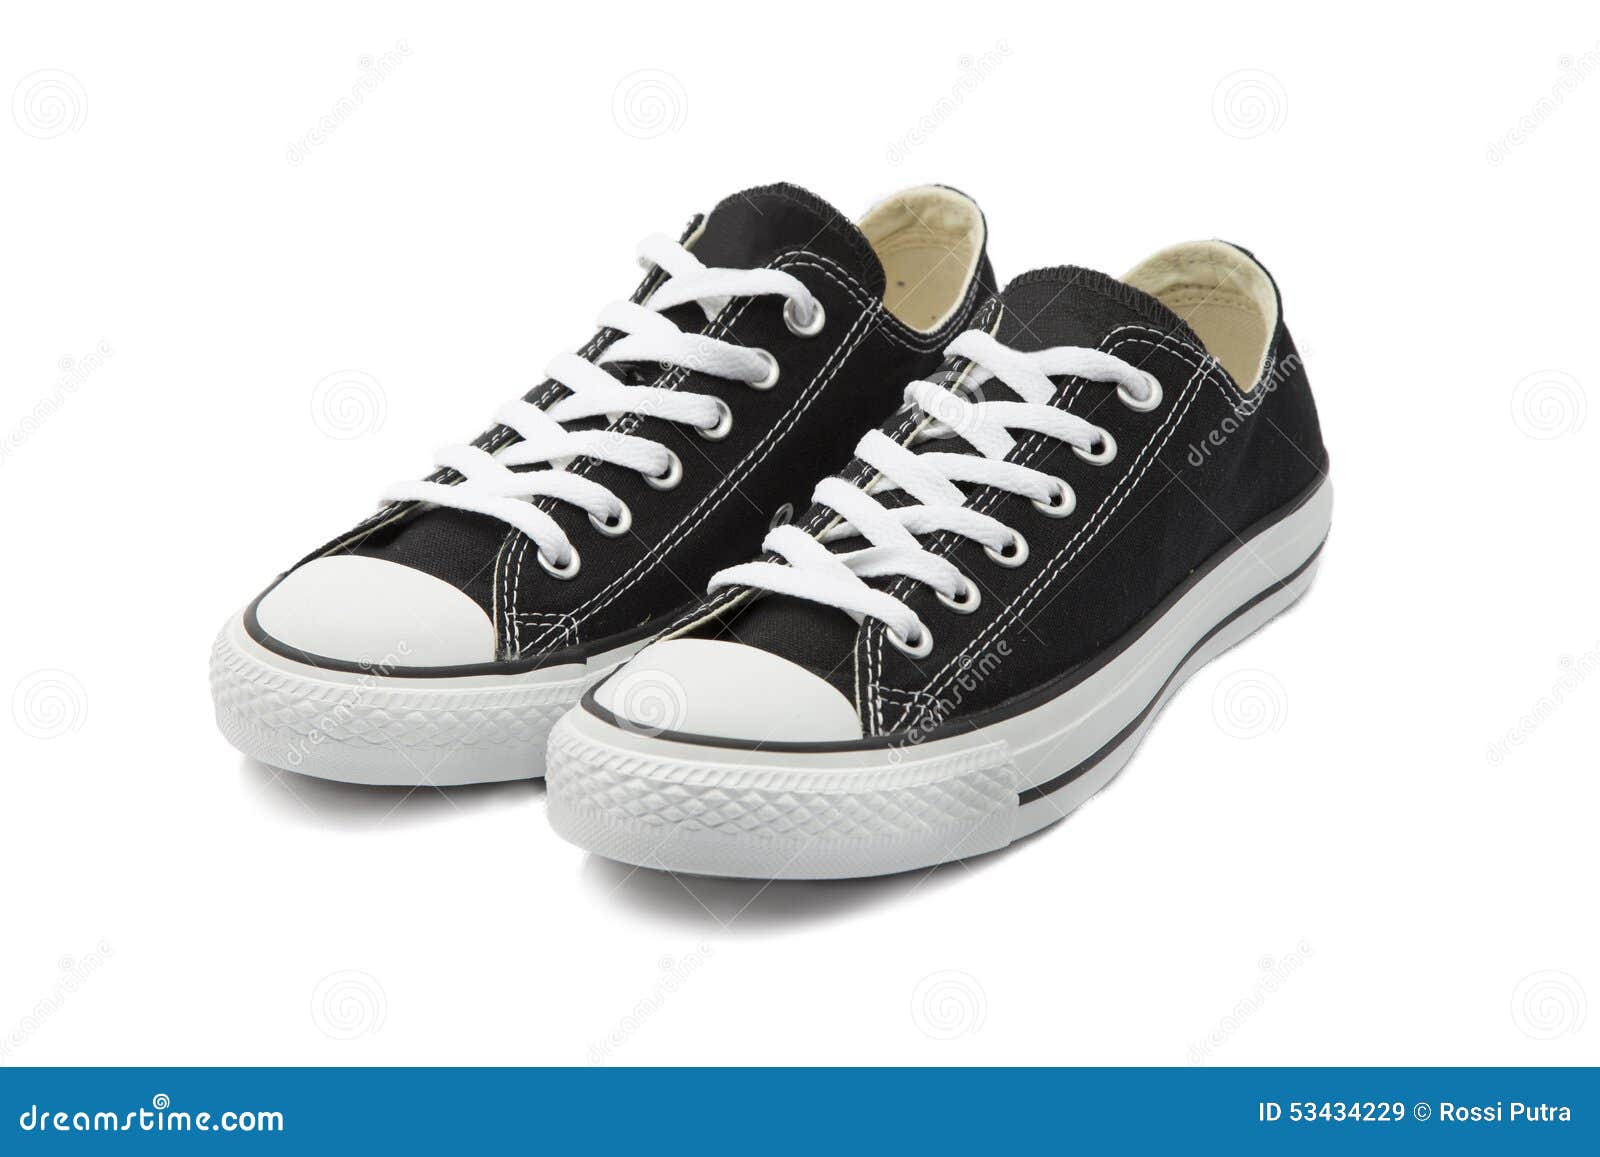 Sneakers on White Background Stock Image - Image of retro, converse ...